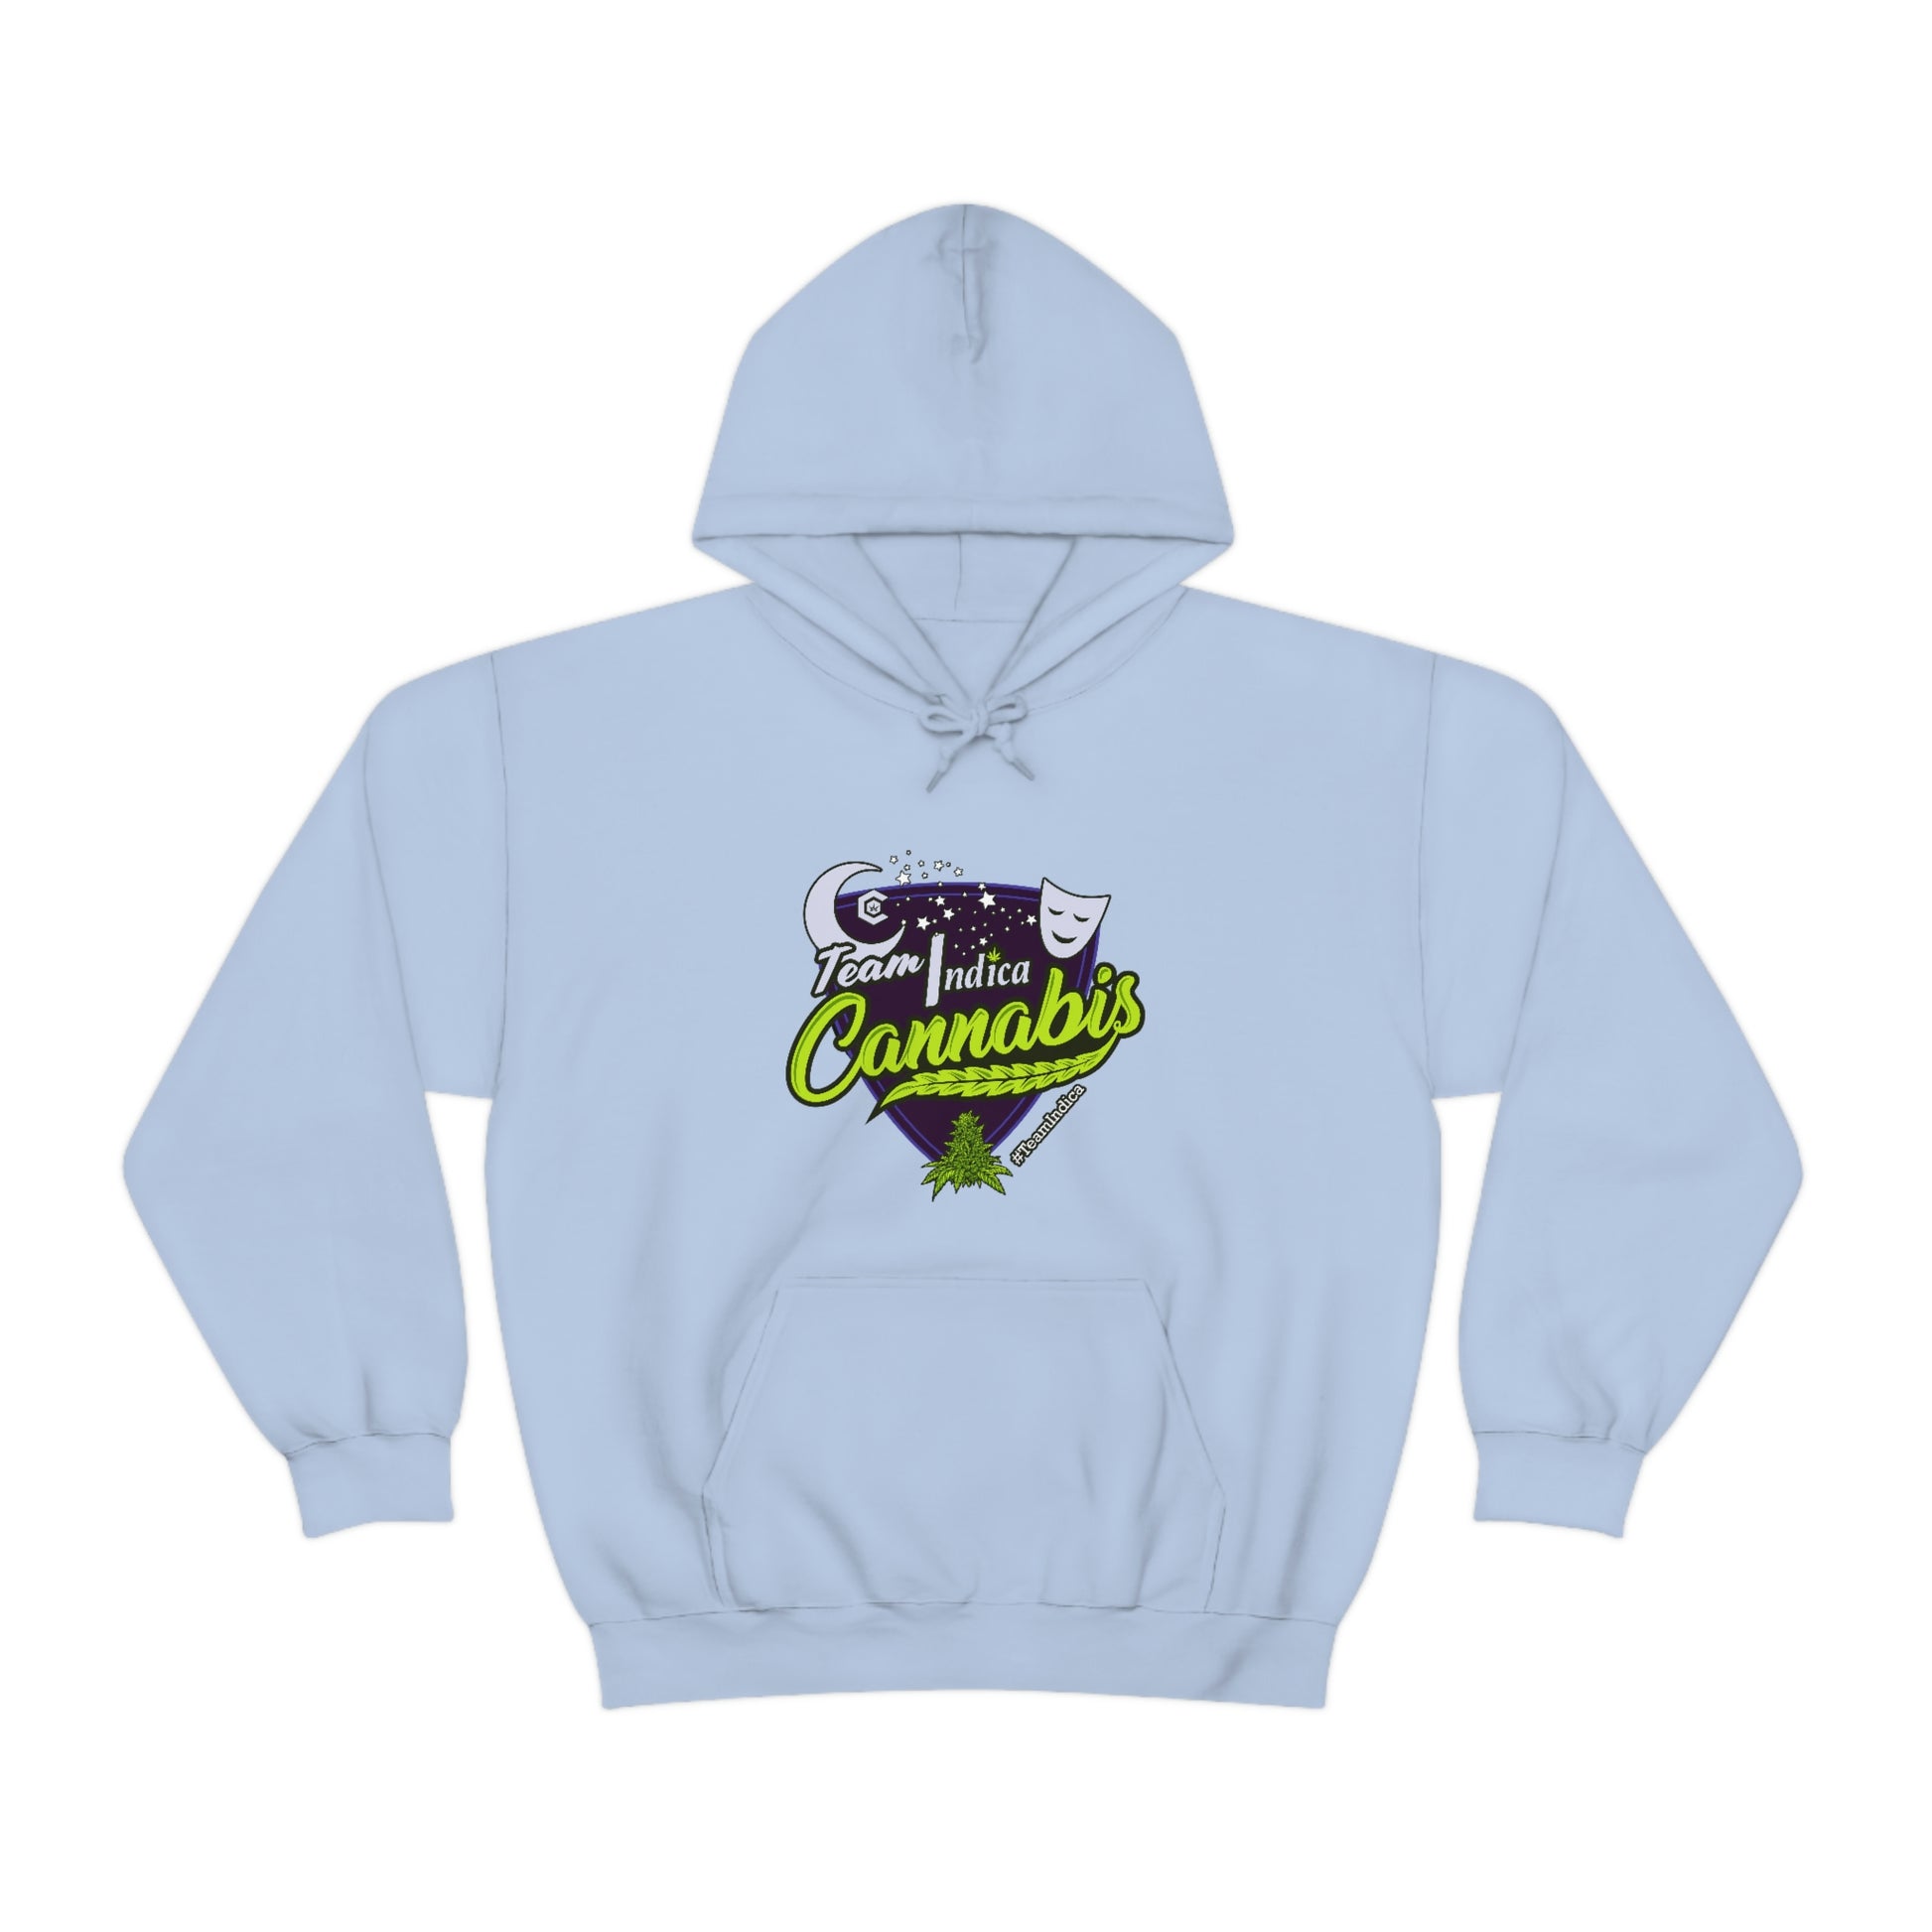 a light blue Team Indica Cannabis Pullover with a purple and green logo.